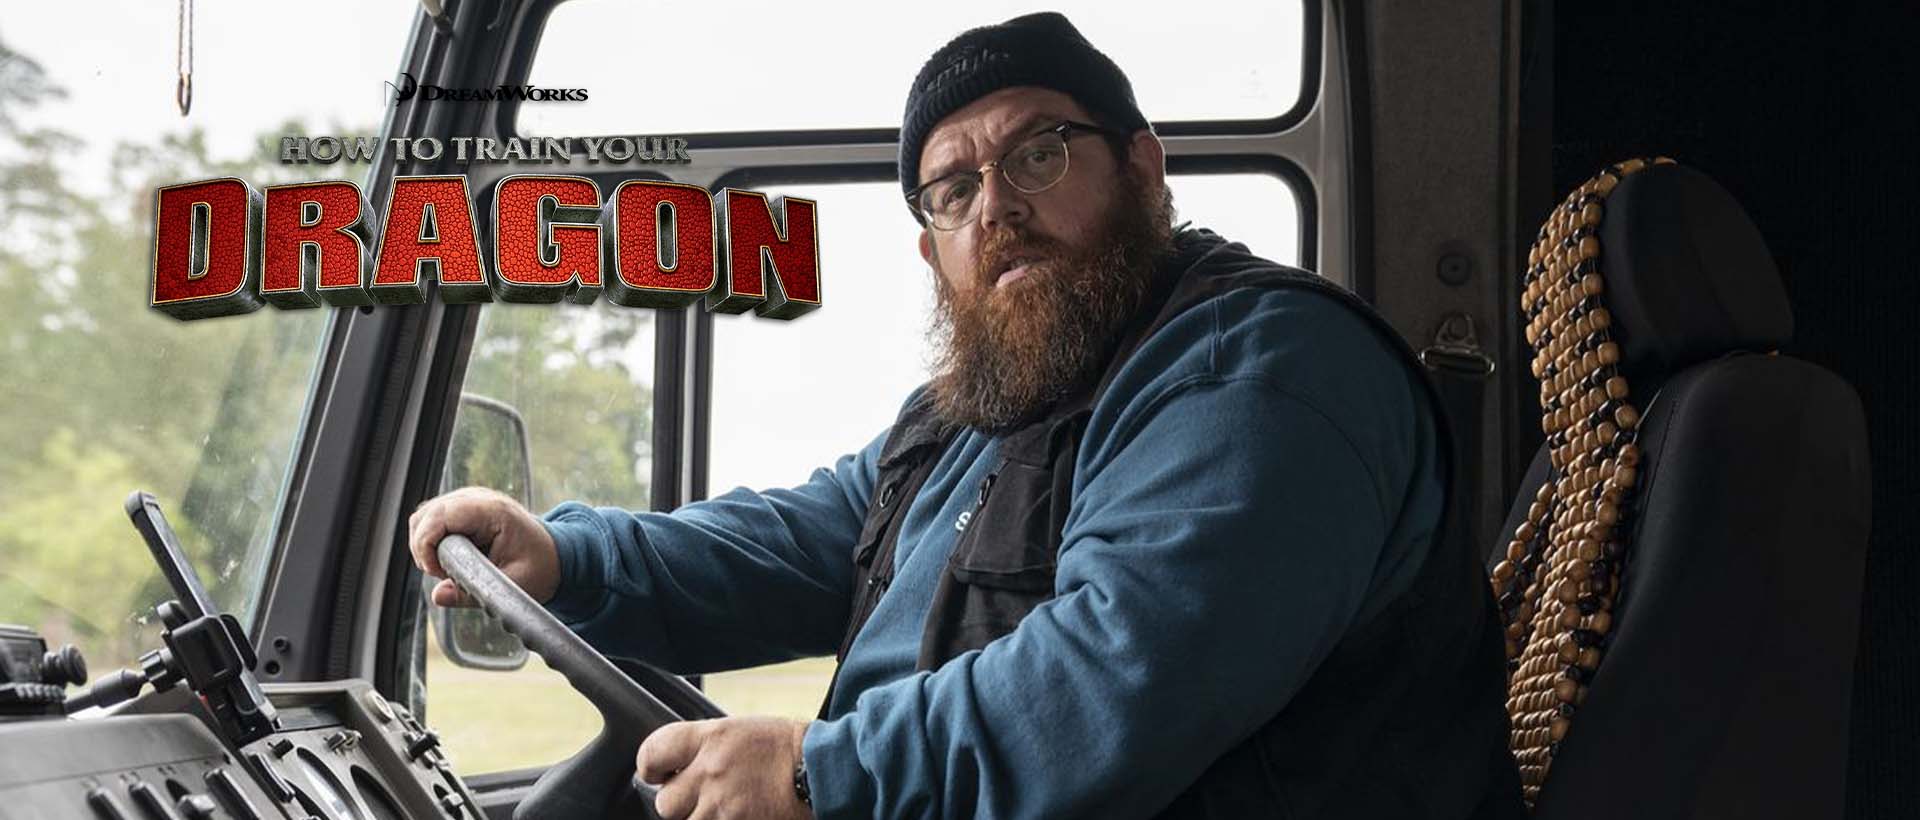 nick frost how to trainpyour dragon banner